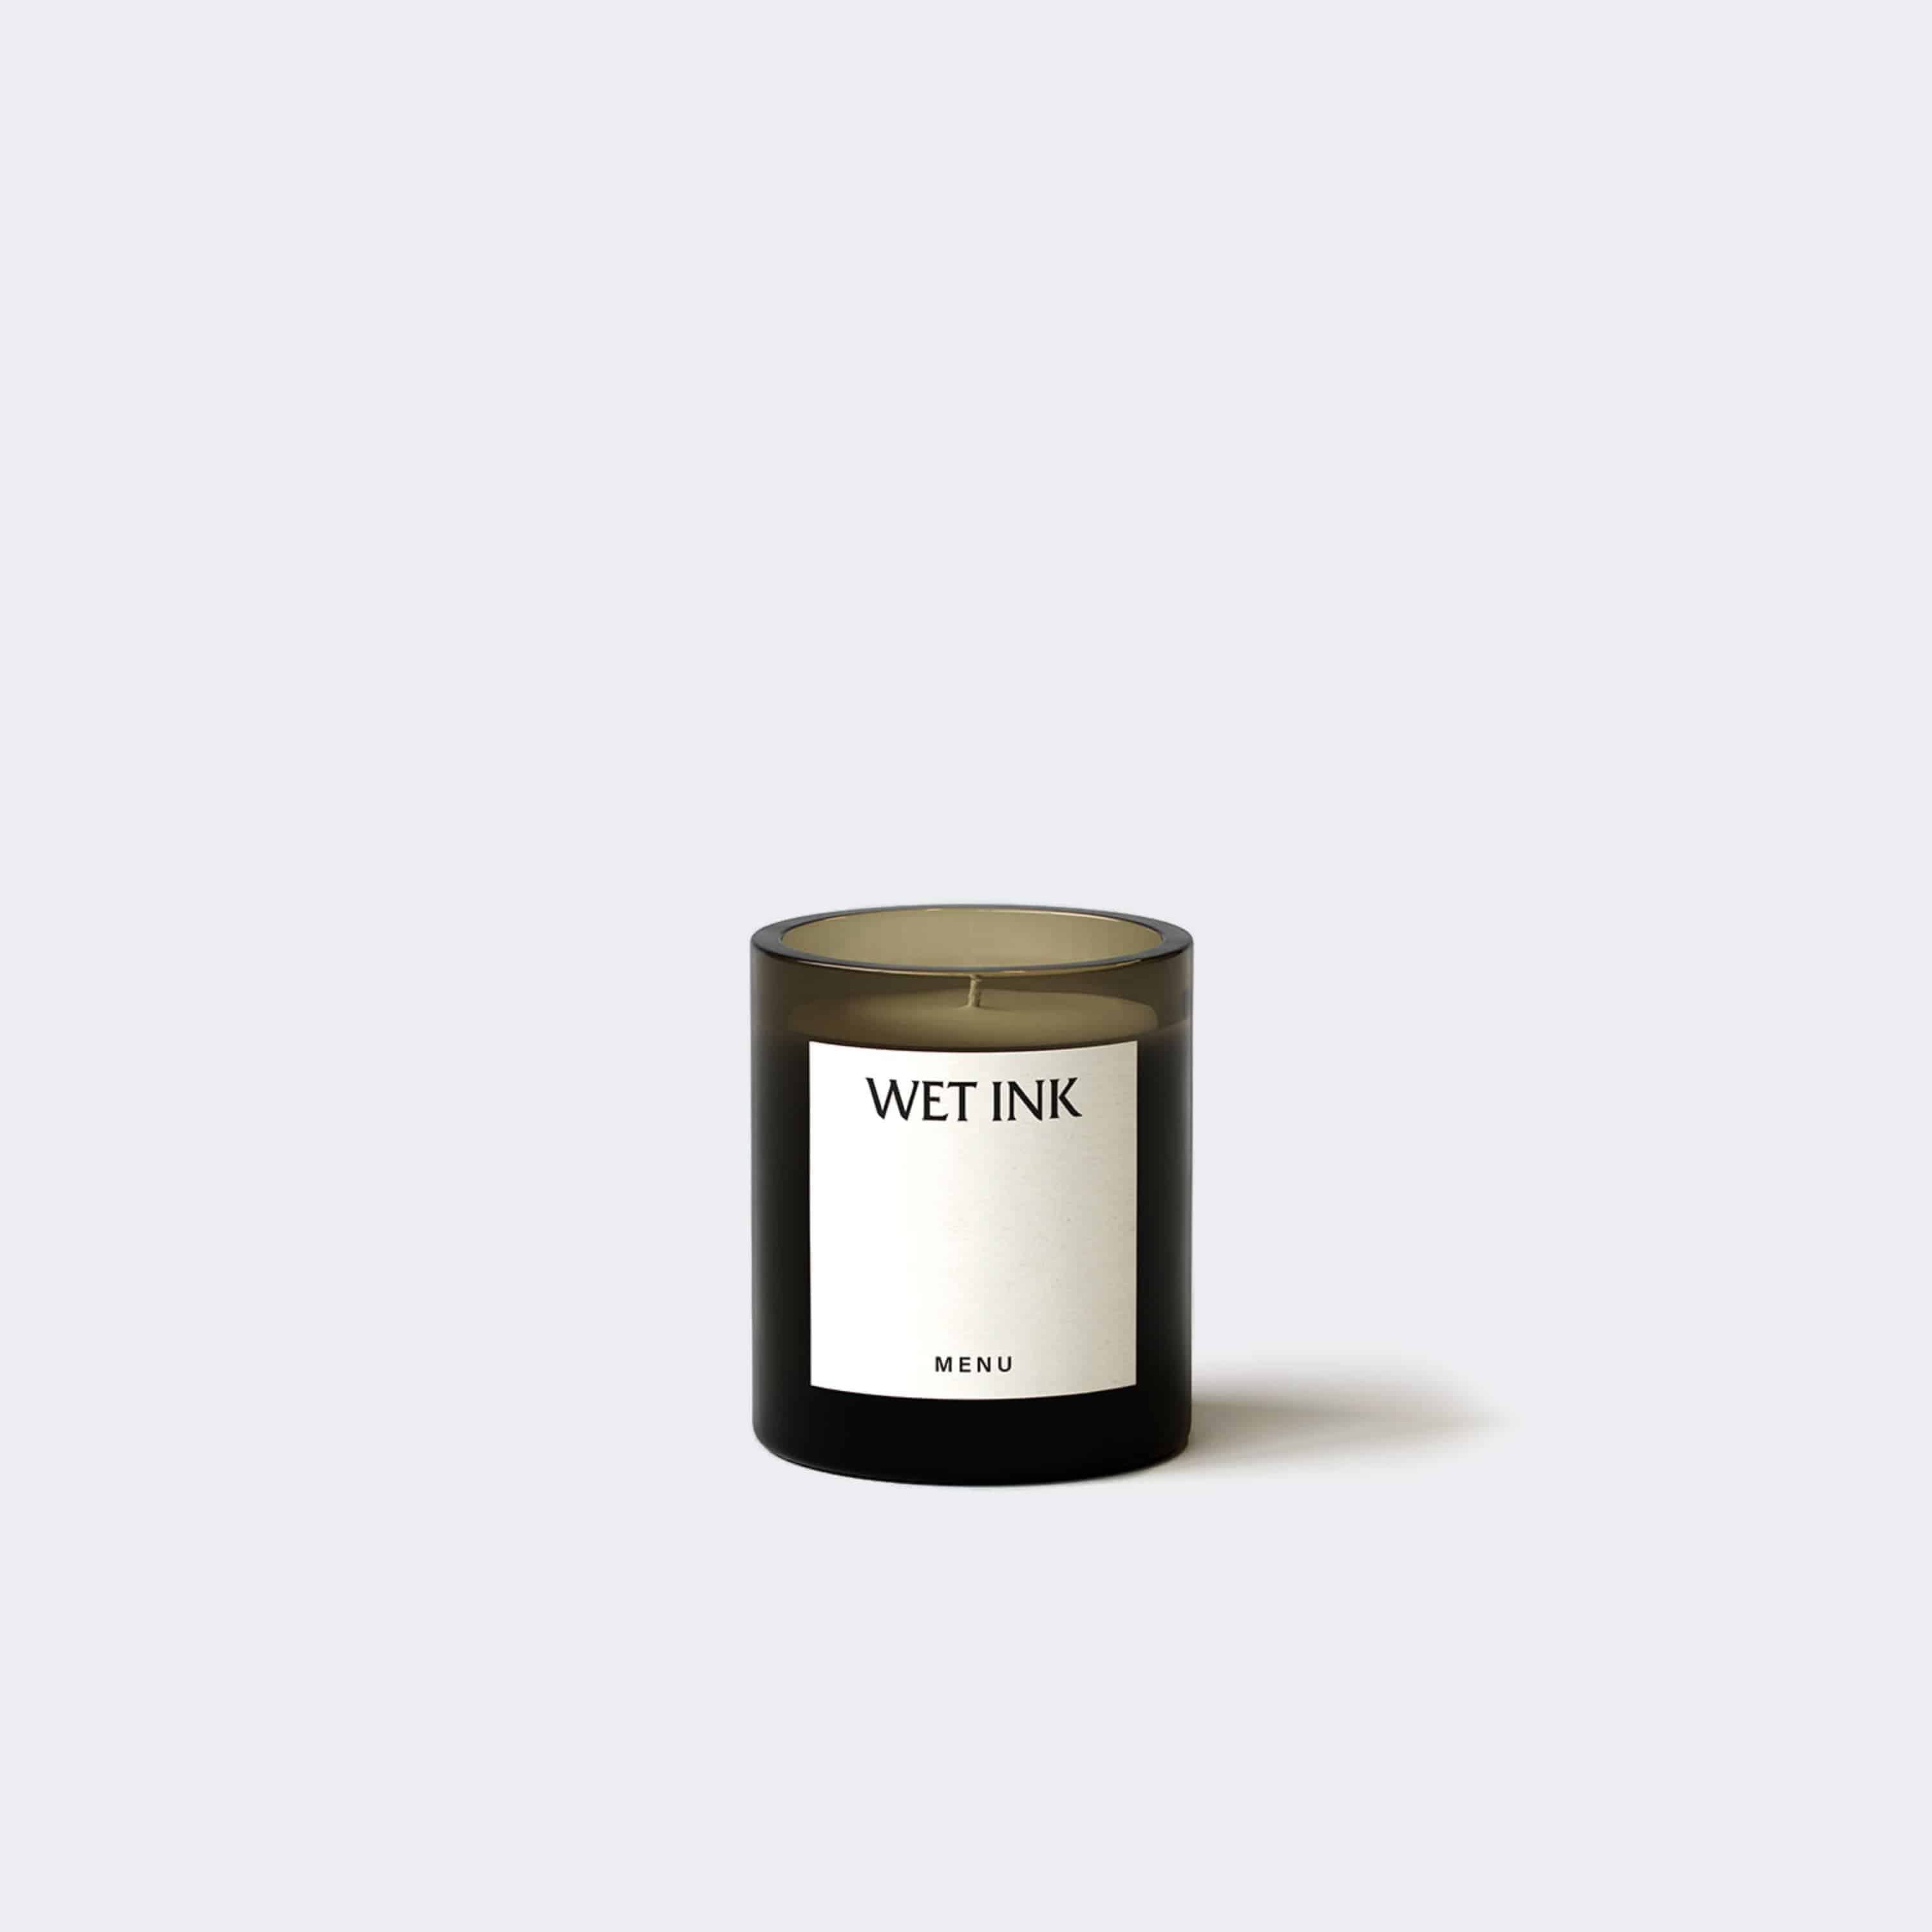 Audo Copenhagen Olfacte Scented Candle, Wet Ink Poured Glass Candle, 8.3 oz. - KANSO#Select Size_Poured Glass Candle, 8.3 oz.